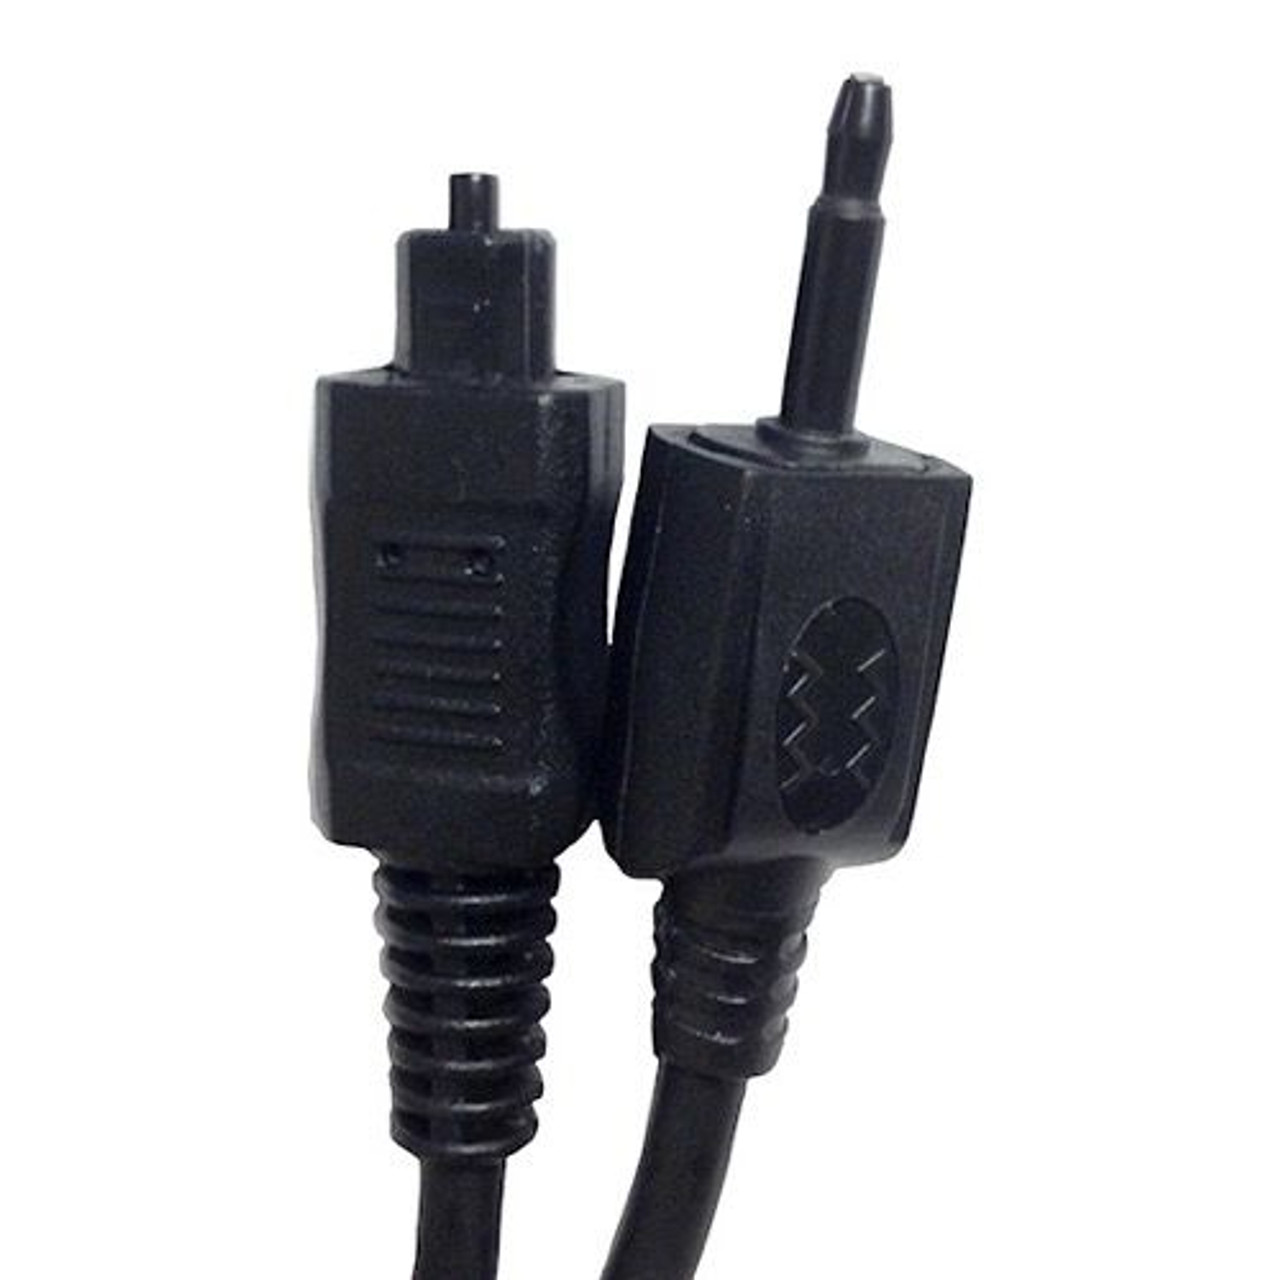 Steren 260-112 12' FT Toslink to Mini Plug Male Cable Optical Digital A/V Premium Audio Cable Dolby DTS Connection TV Component Output / Input Hook-Up Jacks, Part # 260112